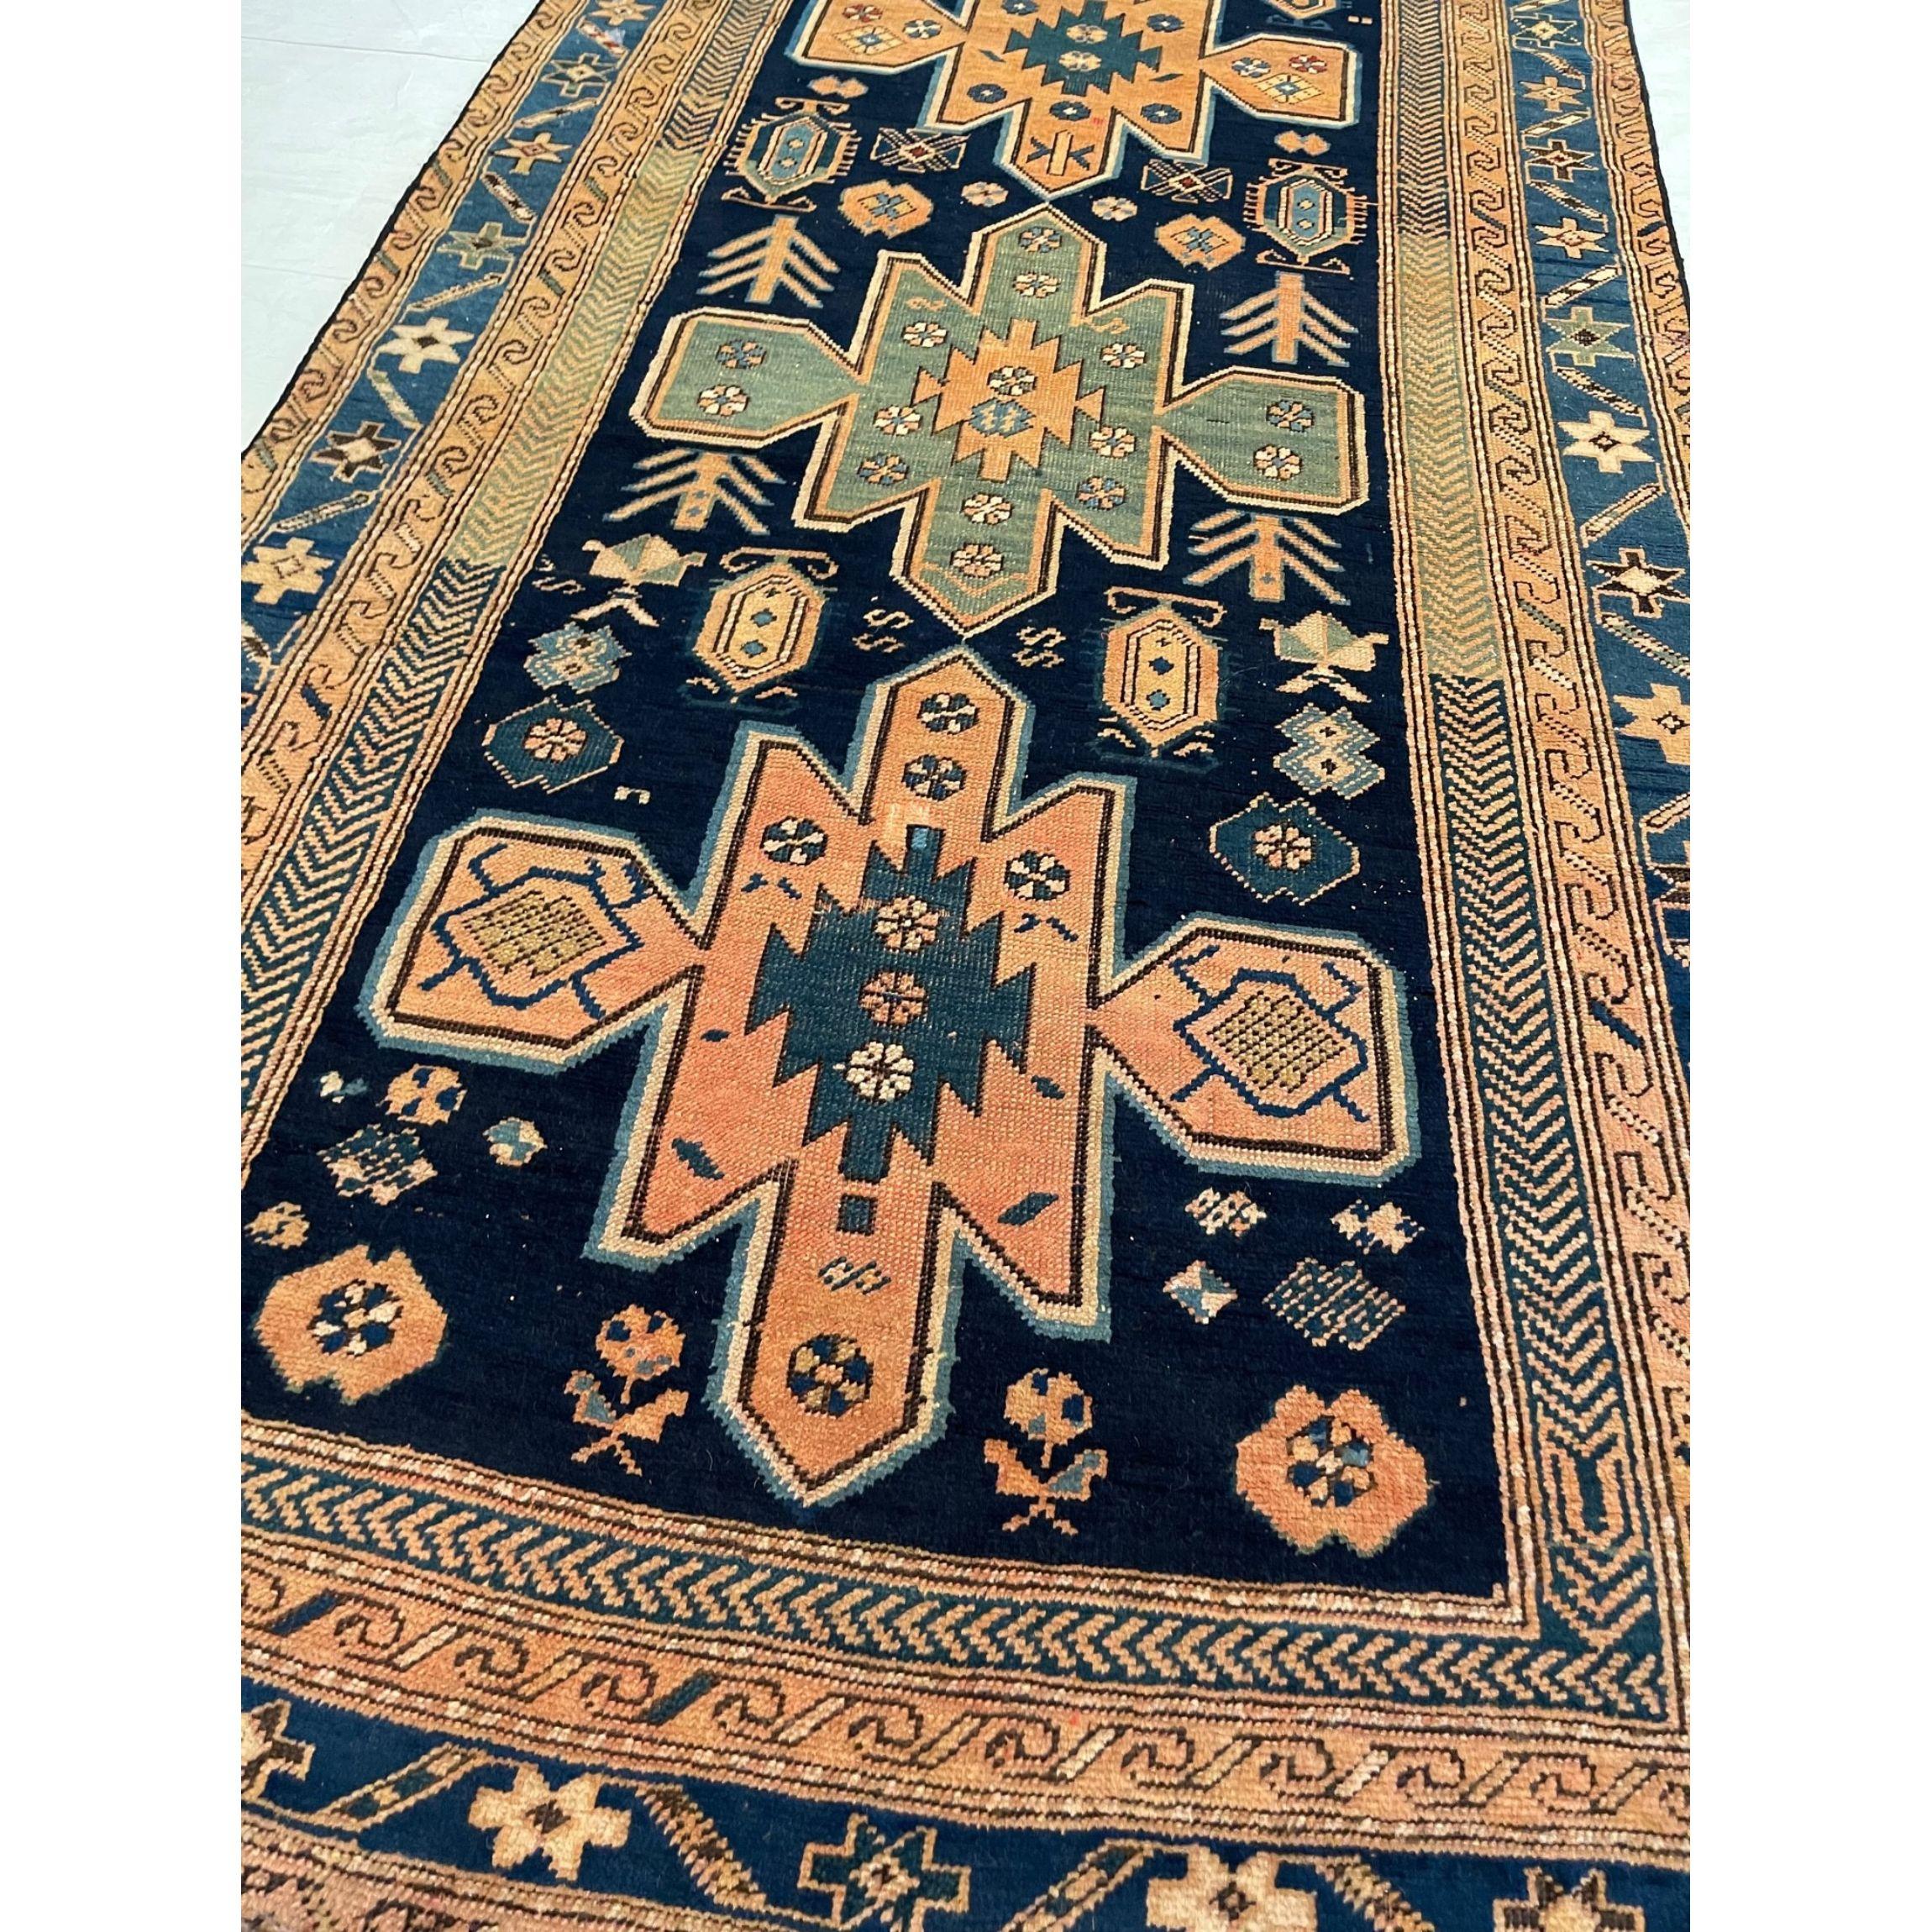 Antique Kazak Rugs – The historic Kazak Khanate was bounded by the rugged mountains and lush valleys of Armenia, Azerbaijan and Georgia. This cultural melting pot was populated by Armenian dyers and weavers, Azeri Turks, groups from the Northern